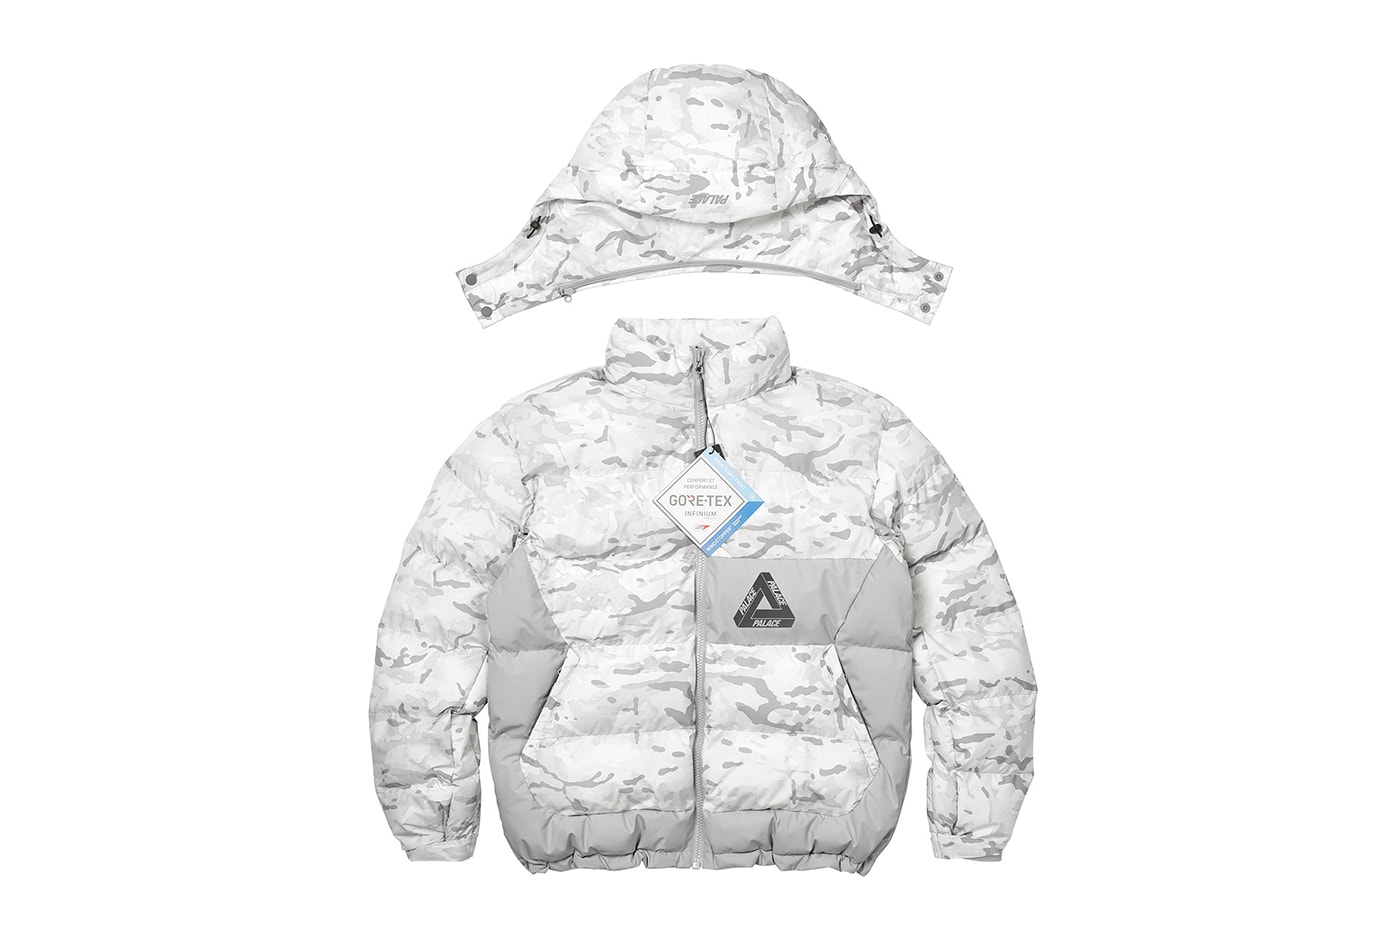 Palace Winter 2020 GORE TEX apparel collection drop info Ski-Doo snowmobile outdoors winter jacket outerwear  